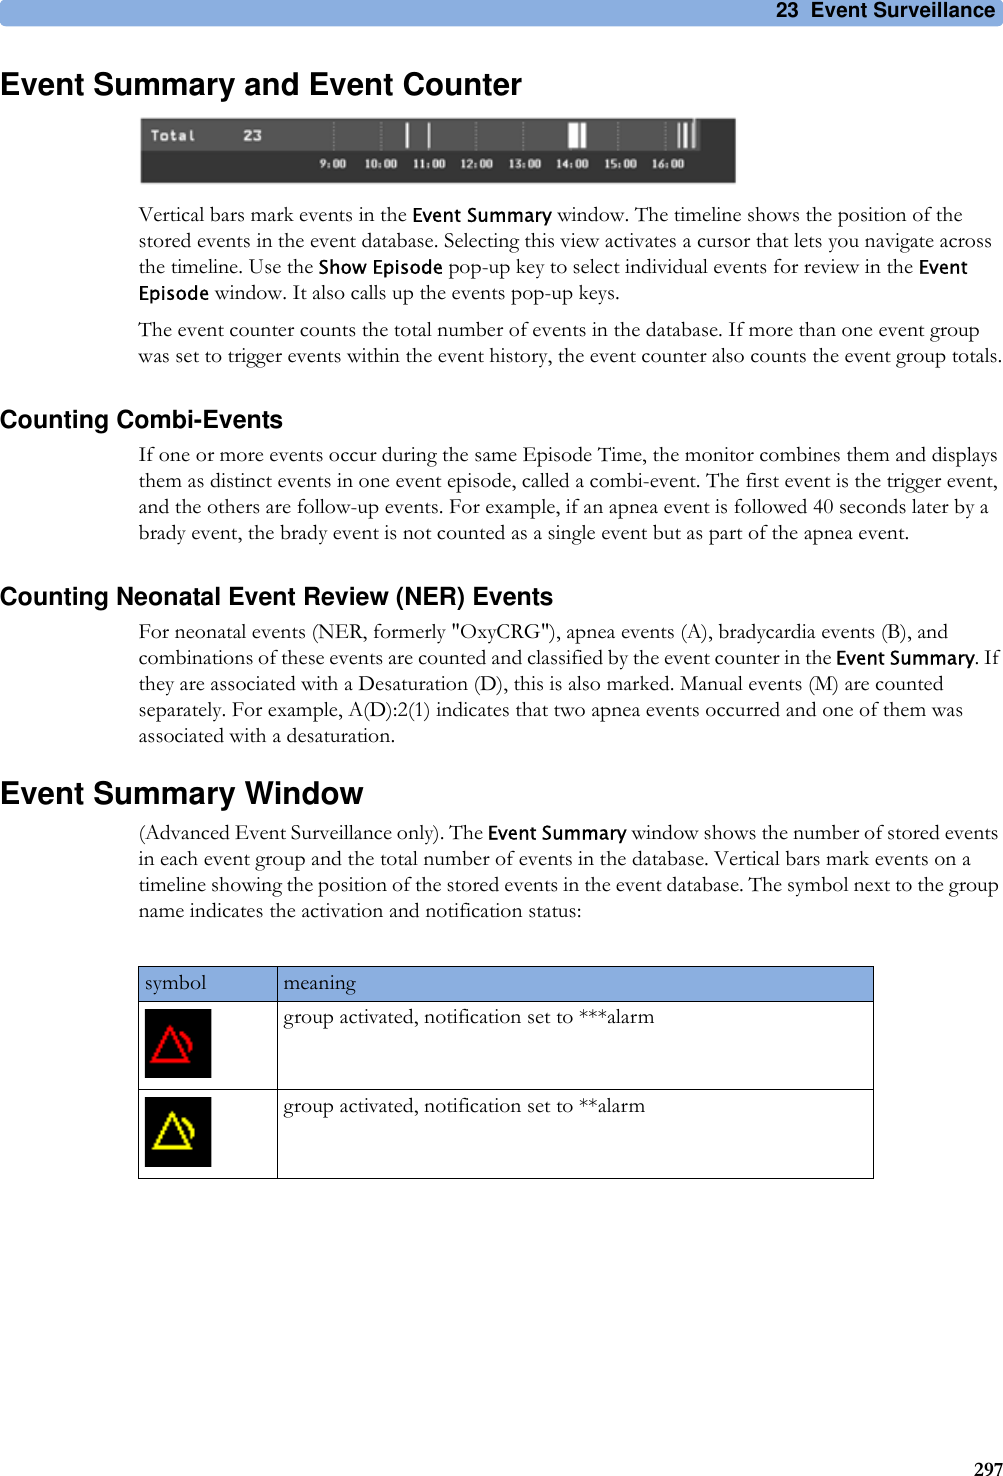 23 Event Surveillance297Event Summary and Event CounterVertical bars mark events in the Event Summary window. The timeline shows the position of the stored events in the event database. Selecting this view activates a cursor that lets you navigate across the timeline. Use the Show Episode pop-up key to select individual events for review in the Event Episode window. It also calls up the events pop-up keys.The event counter counts the total number of events in the database. If more than one event group was set to trigger events within the event history, the event counter also counts the event group totals.Counting Combi-EventsIf one or more events occur during the same Episode Time, the monitor combines them and displays them as distinct events in one event episode, called a combi-event. The first event is the trigger event, and the others are follow-up events. For example, if an apnea event is followed 40 seconds later by a brady event, the brady event is not counted as a single event but as part of the apnea event.Counting Neonatal Event Review (NER) EventsFor neonatal events (NER, formerly &quot;OxyCRG&quot;), apnea events (A), bradycardia events (B), and combinations of these events are counted and classified by the event counter in the Event Summary. If they are associated with a Desaturation (D), this is also marked. Manual events (M) are counted separately. For example, A(D):2(1) indicates that two apnea events occurred and one of them was associated with a desaturation.Event Summary Window(Advanced Event Surveillance only). The Event Summary window shows the number of stored events in each event group and the total number of events in the database. Vertical bars mark events on a timeline showing the position of the stored events in the event database. The symbol next to the group name indicates the activation and notification status:symbol meaninggroup activated, notification set to ***alarmgroup activated, notification set to **alarm